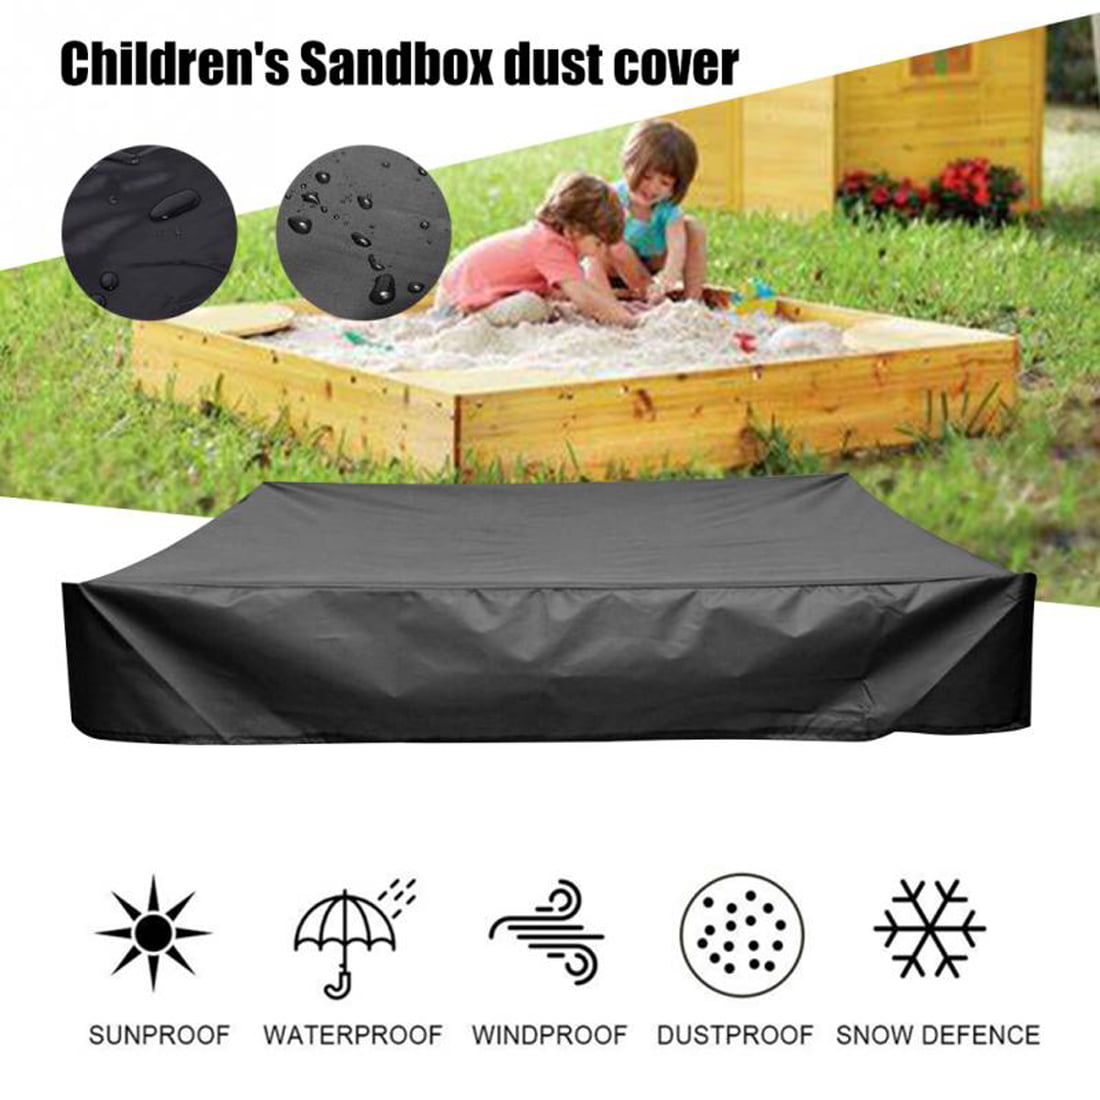 Square Protective Cover Waterproof Dustproof Outdoor Cover for Sand and Toys Away from Dust and Rain Universal for Four Season Sandbox Cover 